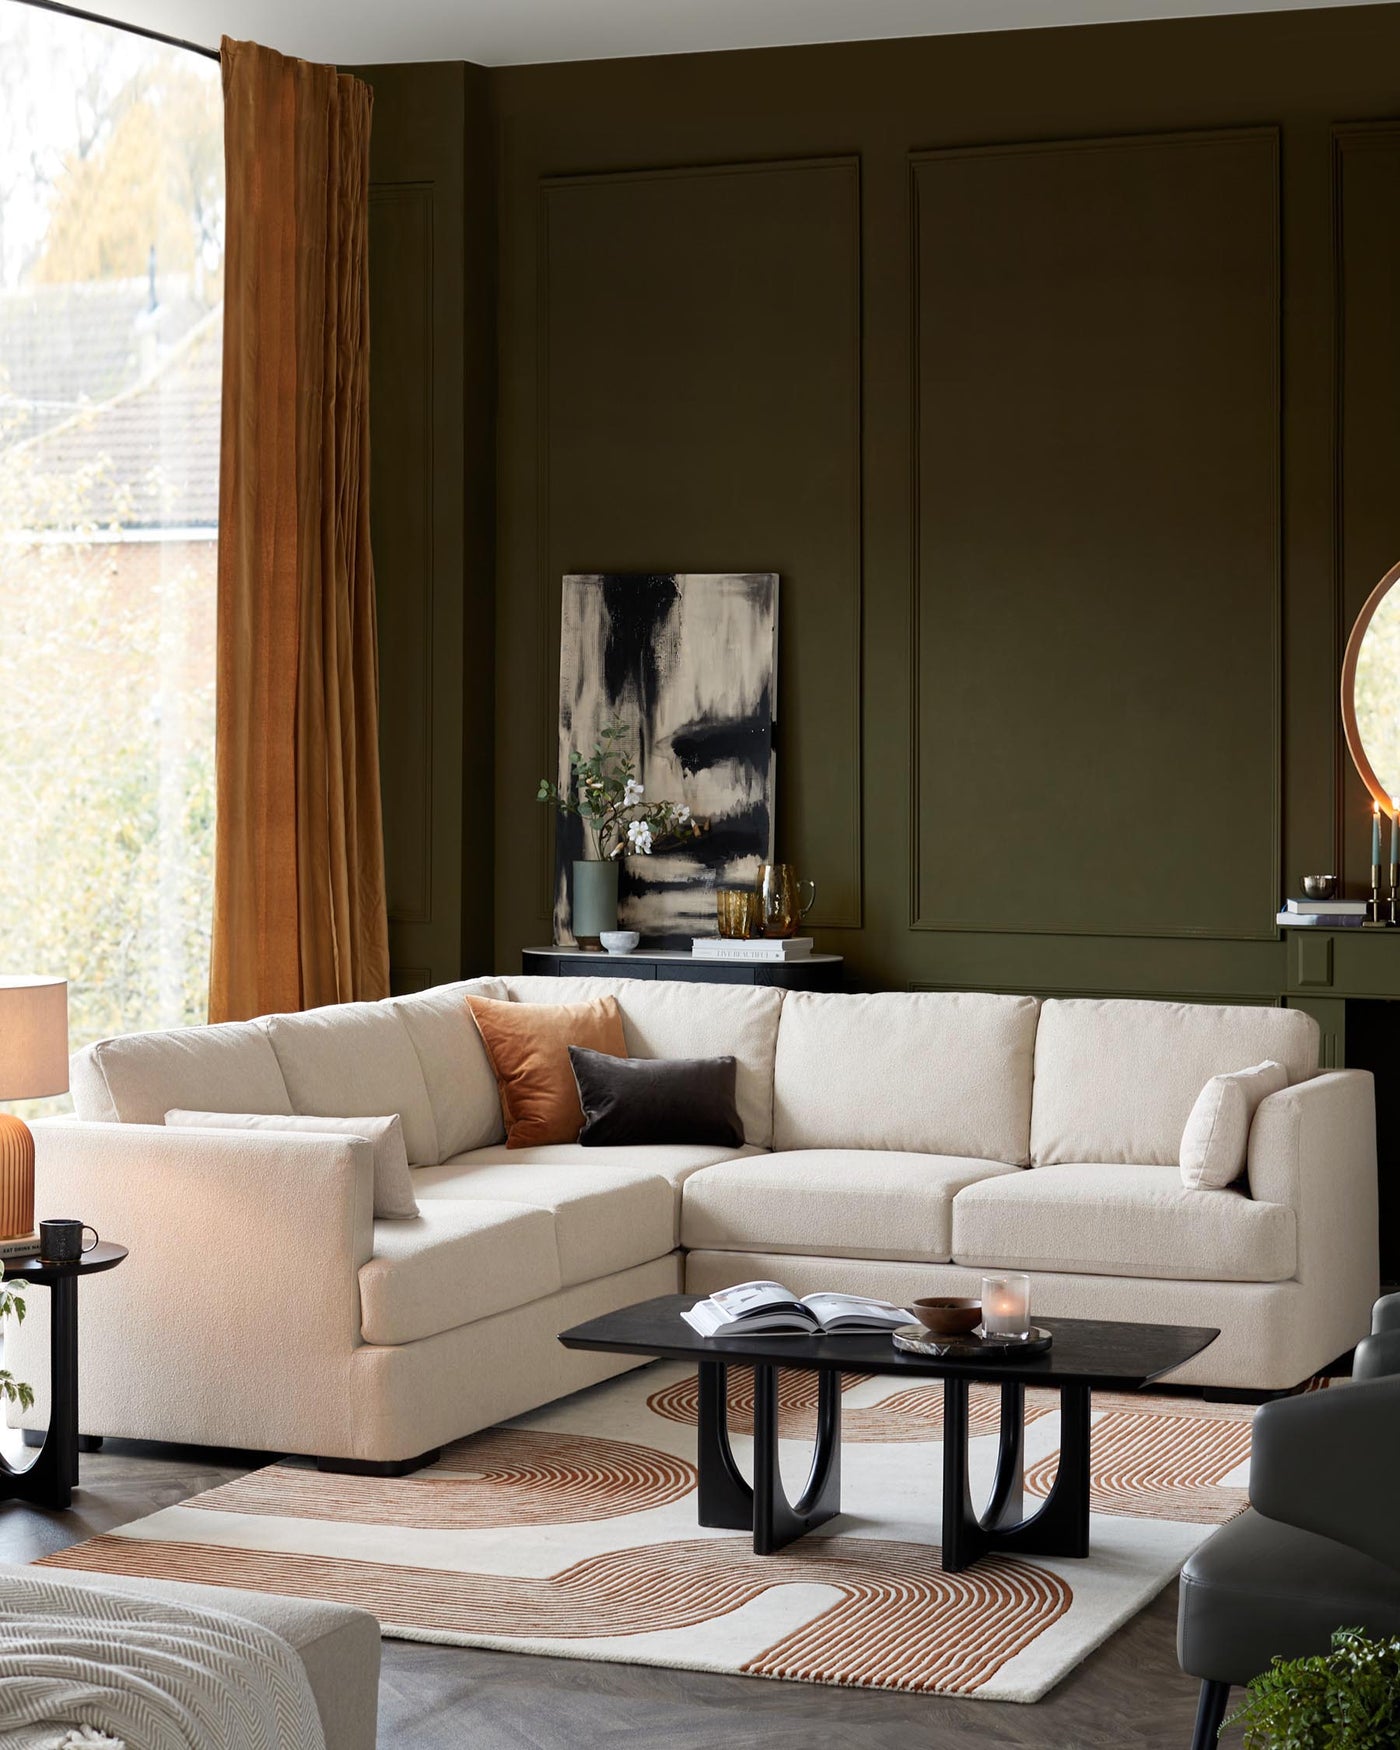 Corner L-shaped beige sofa with textured upholstery and plush cushions, paired with a low-profile black oval coffee table with sleek curved legs on a neutral-toned area rug with abstract design.